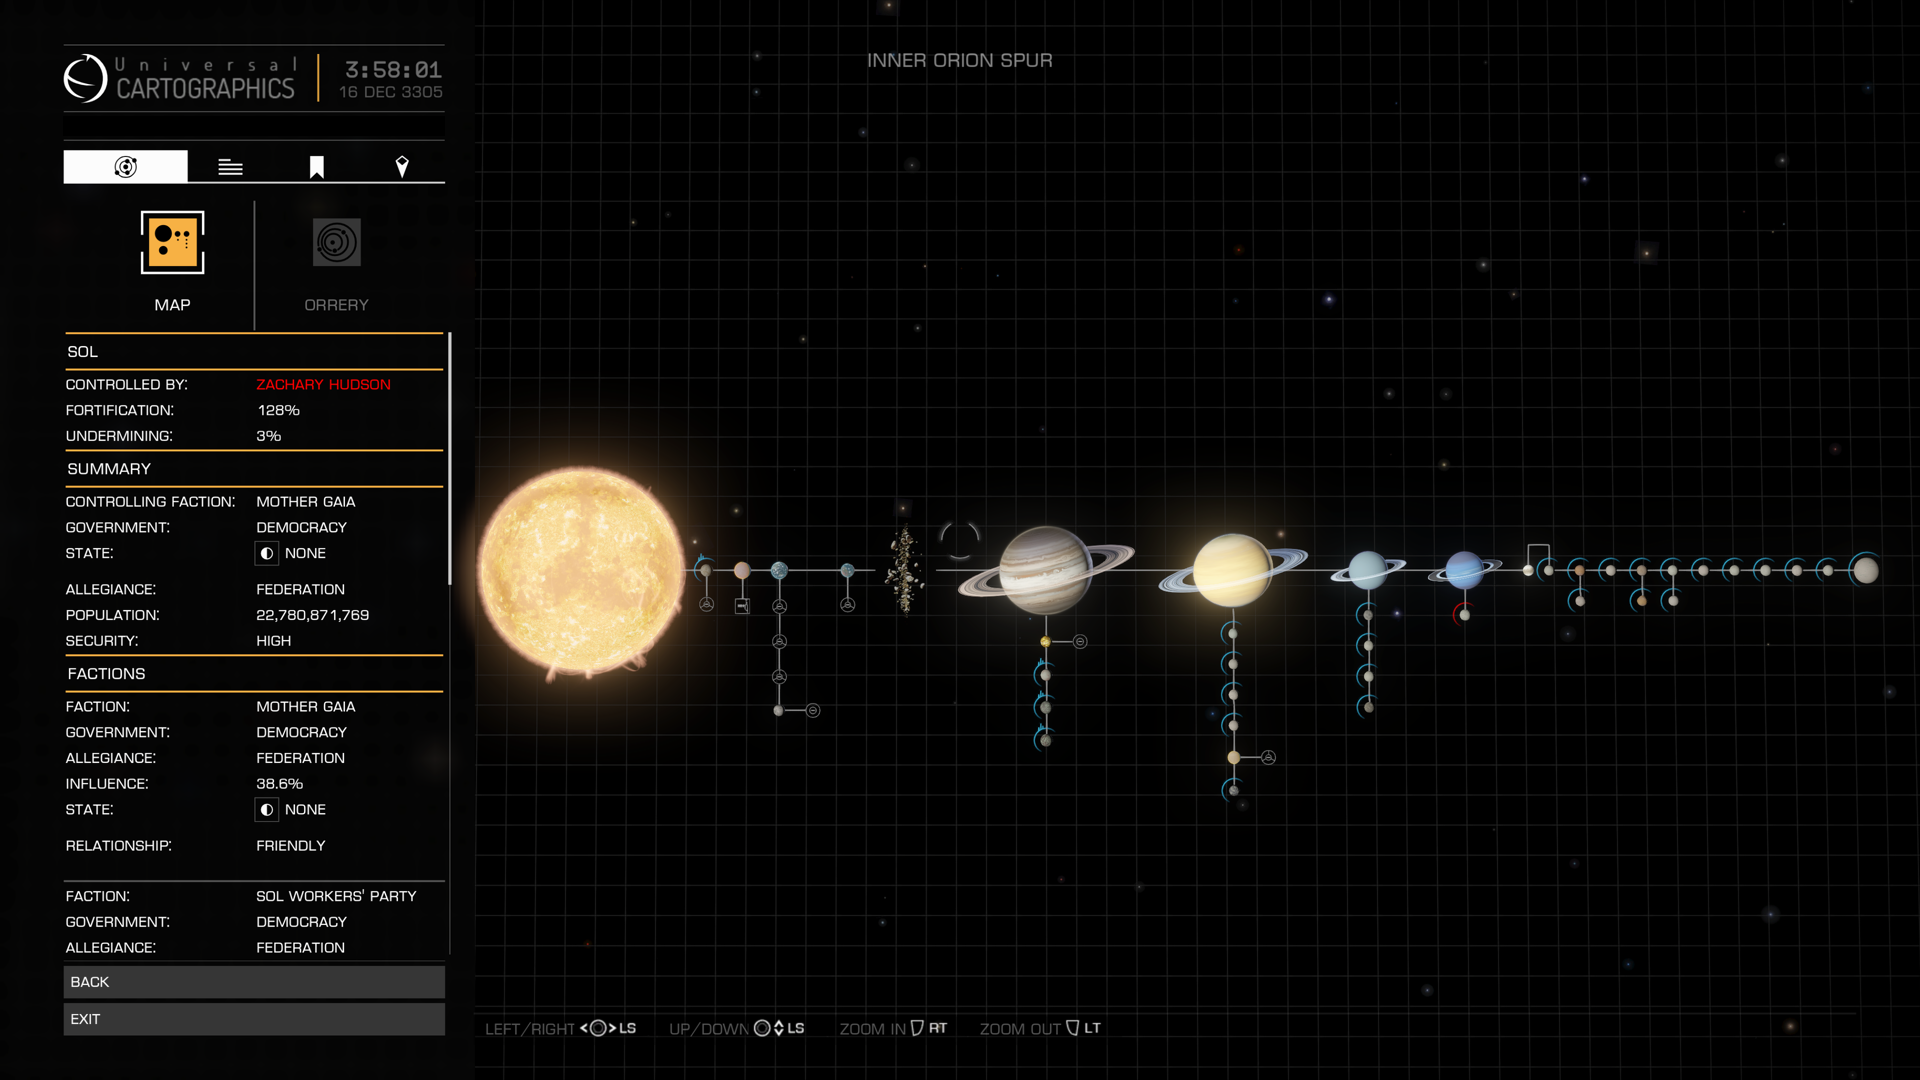 Explore the surfaces of planets in 'Elite: Dangerous' beta